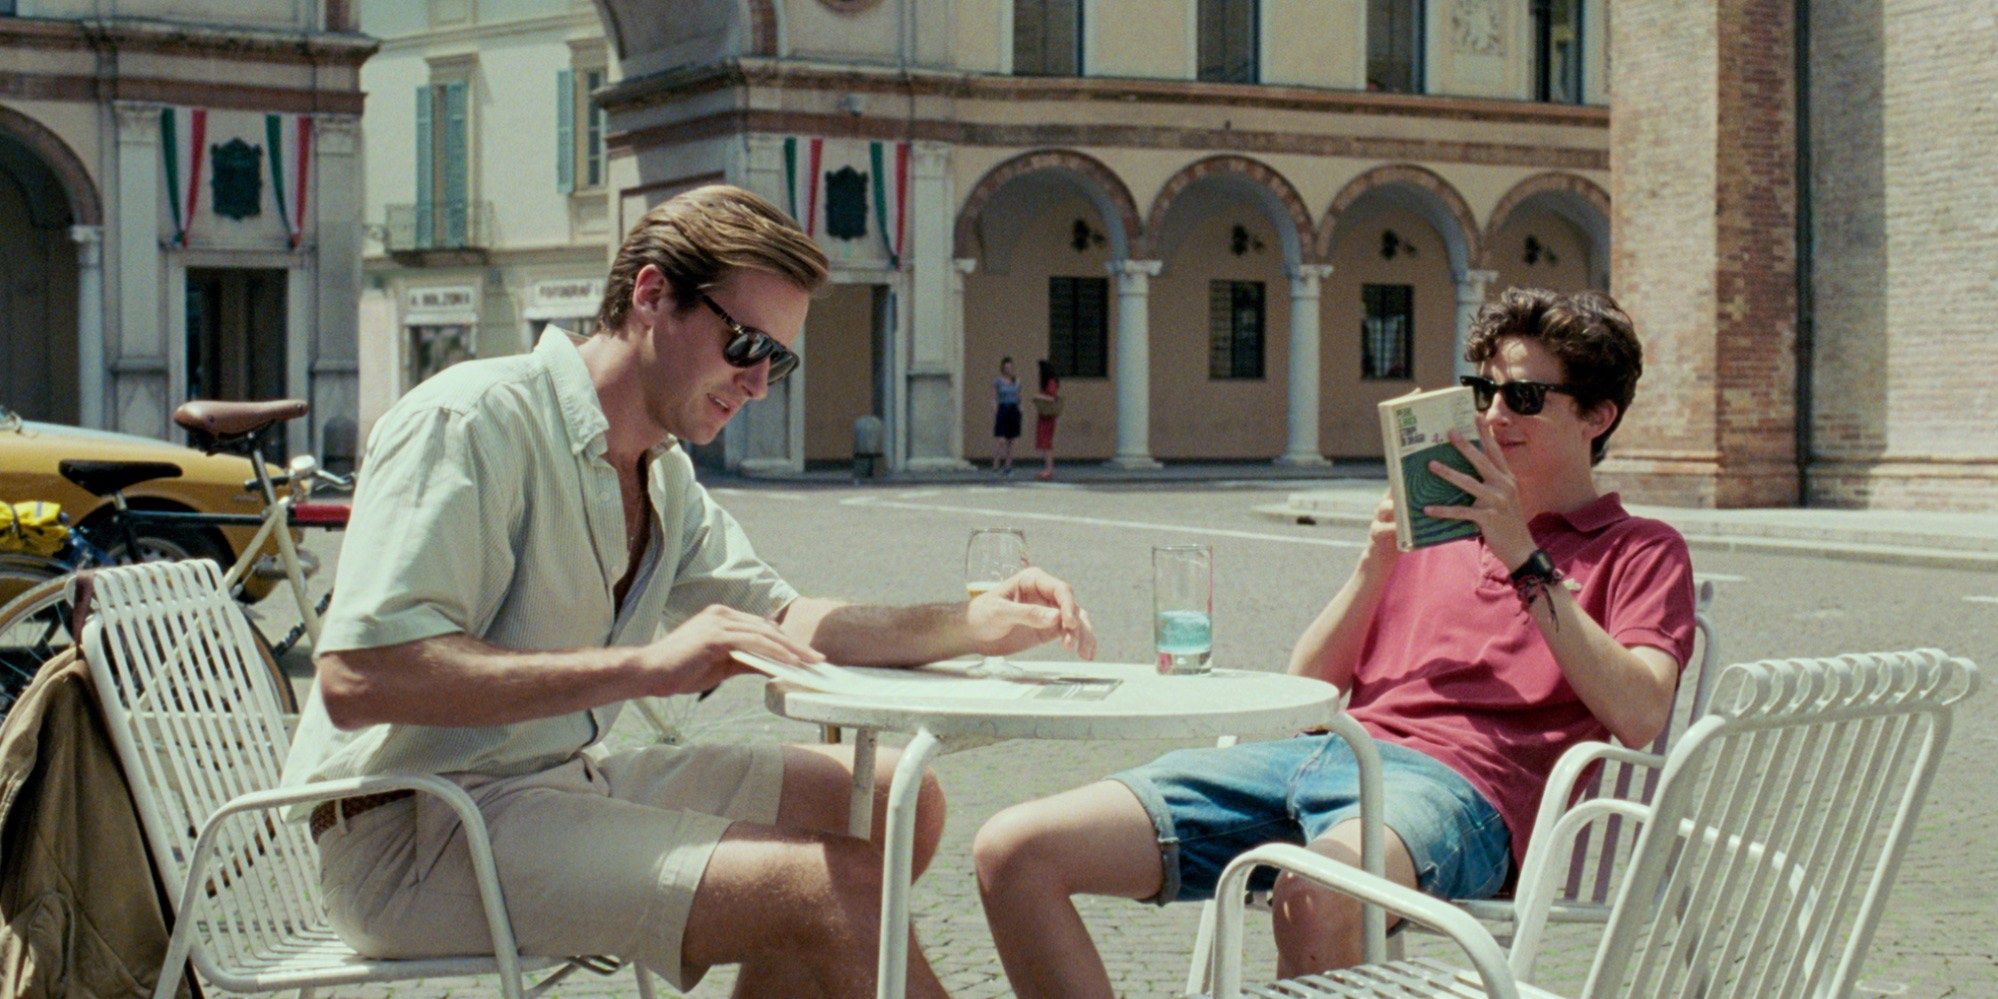 Call Me By Your Name & 9 Other Movies With Great Cinematography